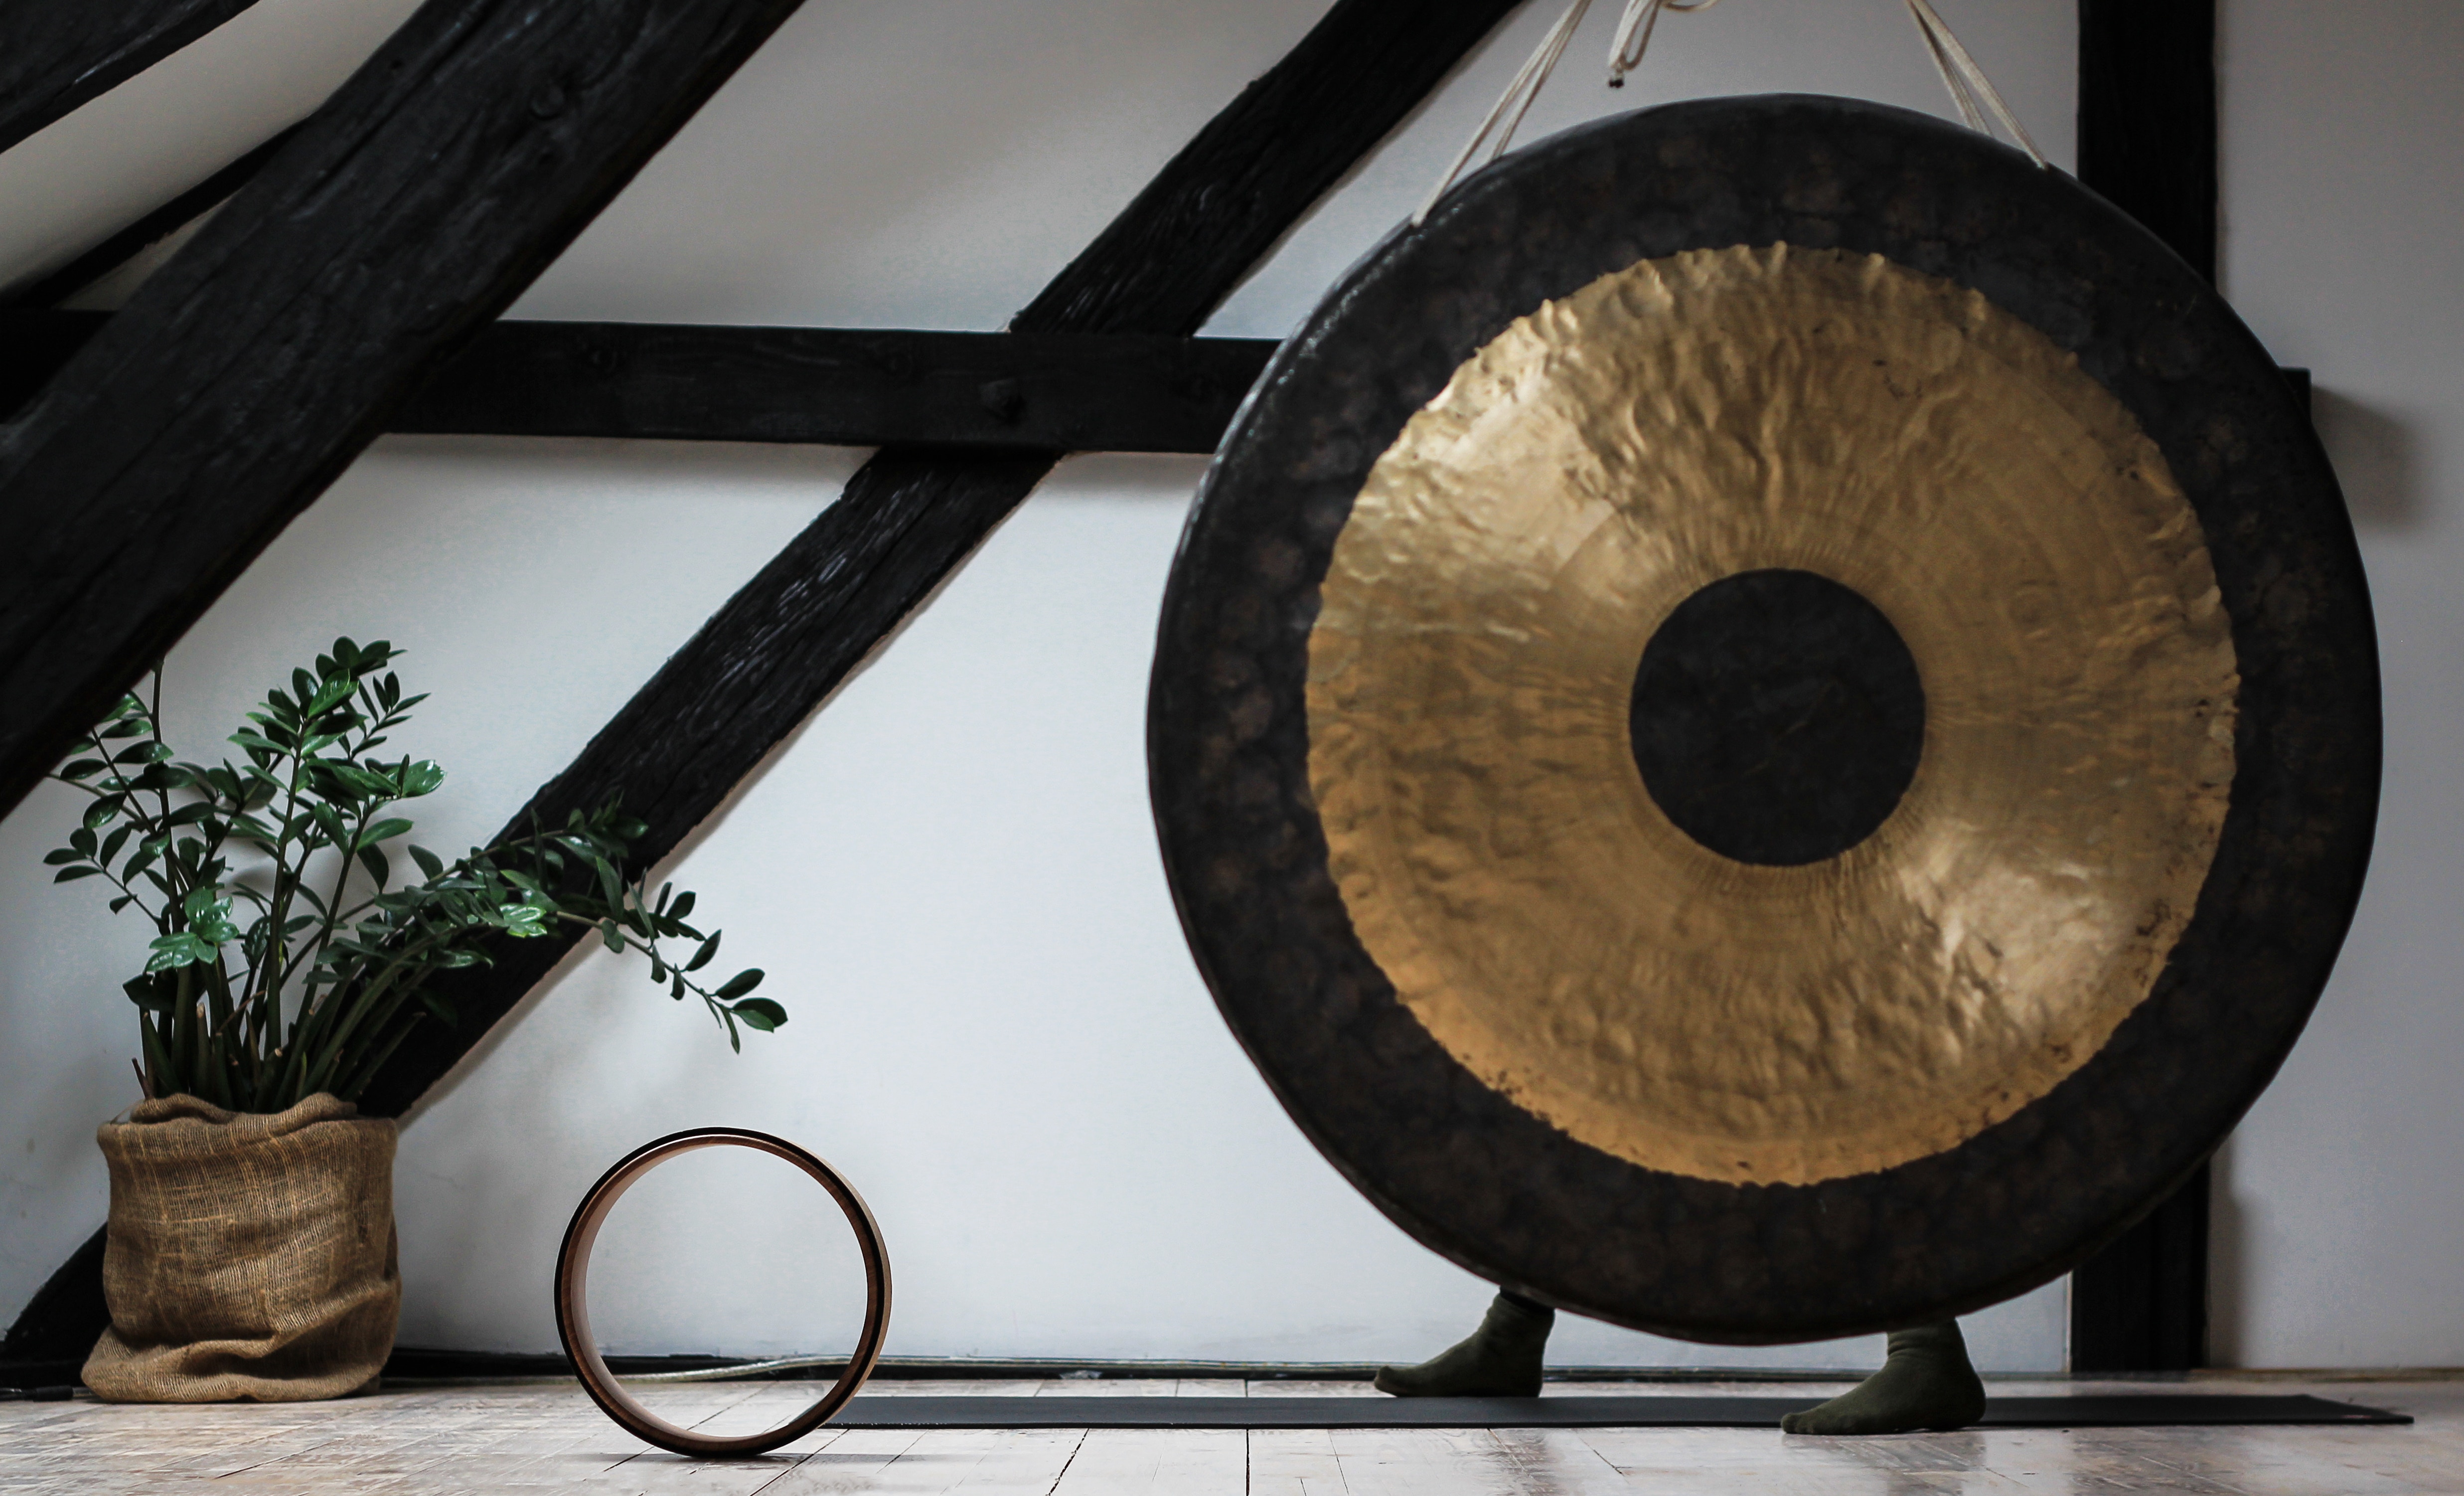 BICESTER, OXFORDSHIRE - Gong Sound Bath